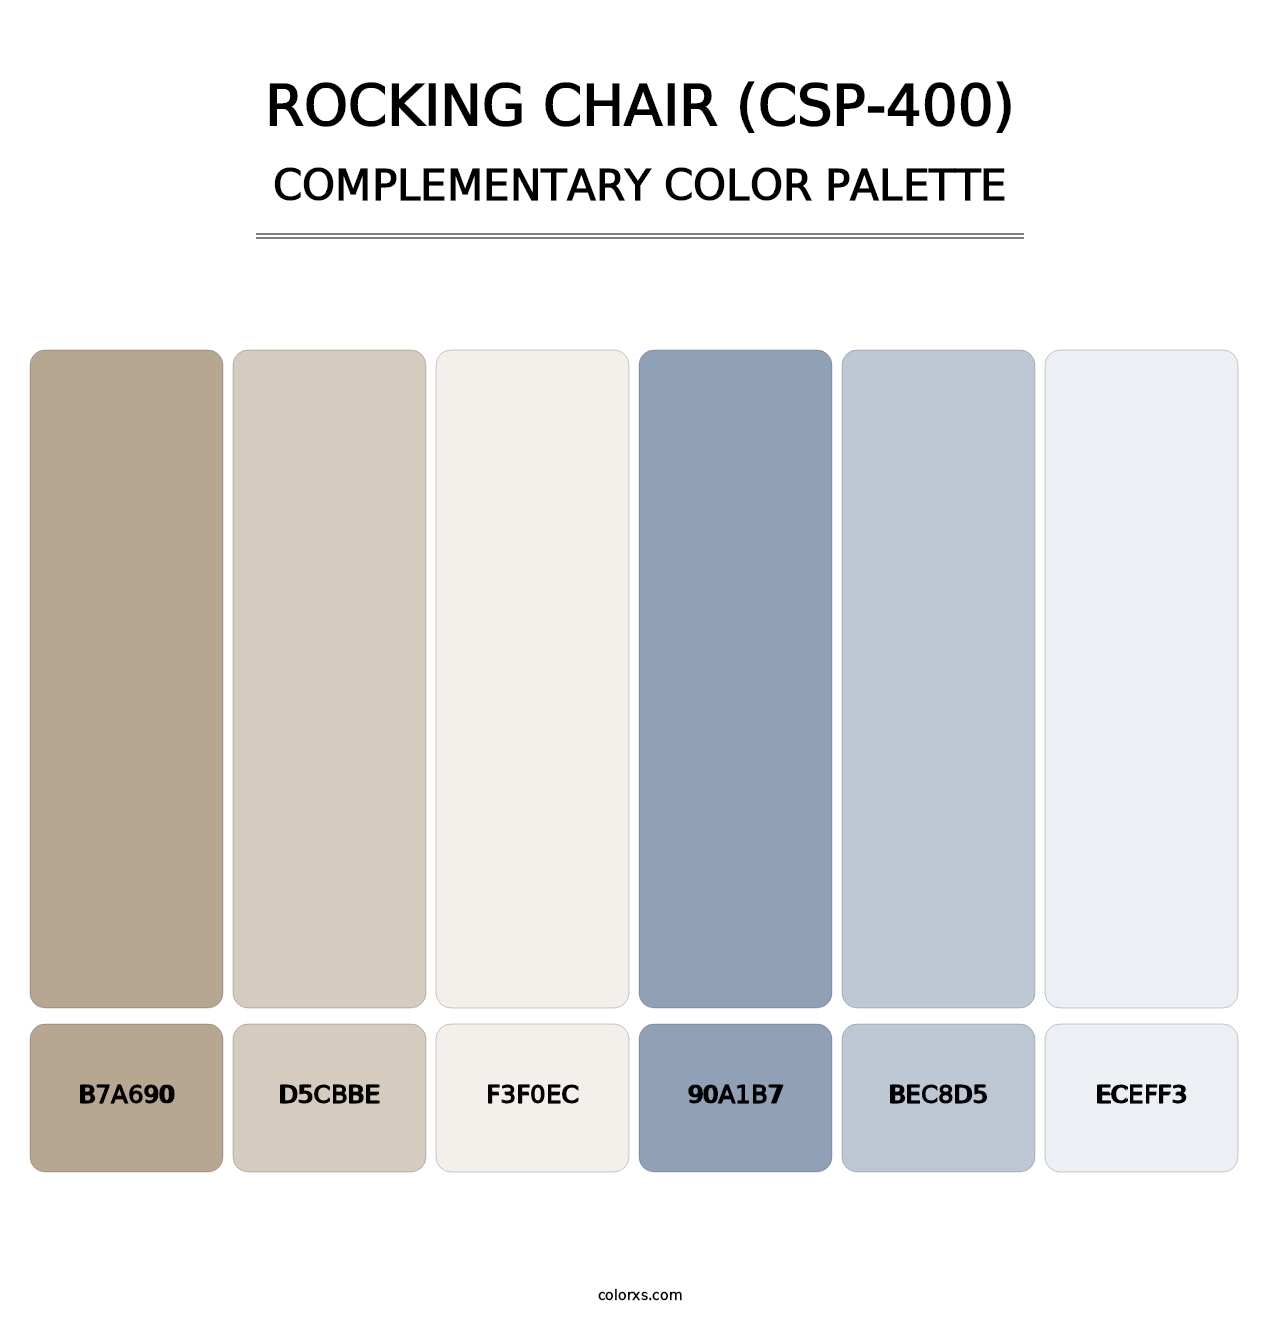 Rocking Chair (CSP-400) - Complementary Color Palette